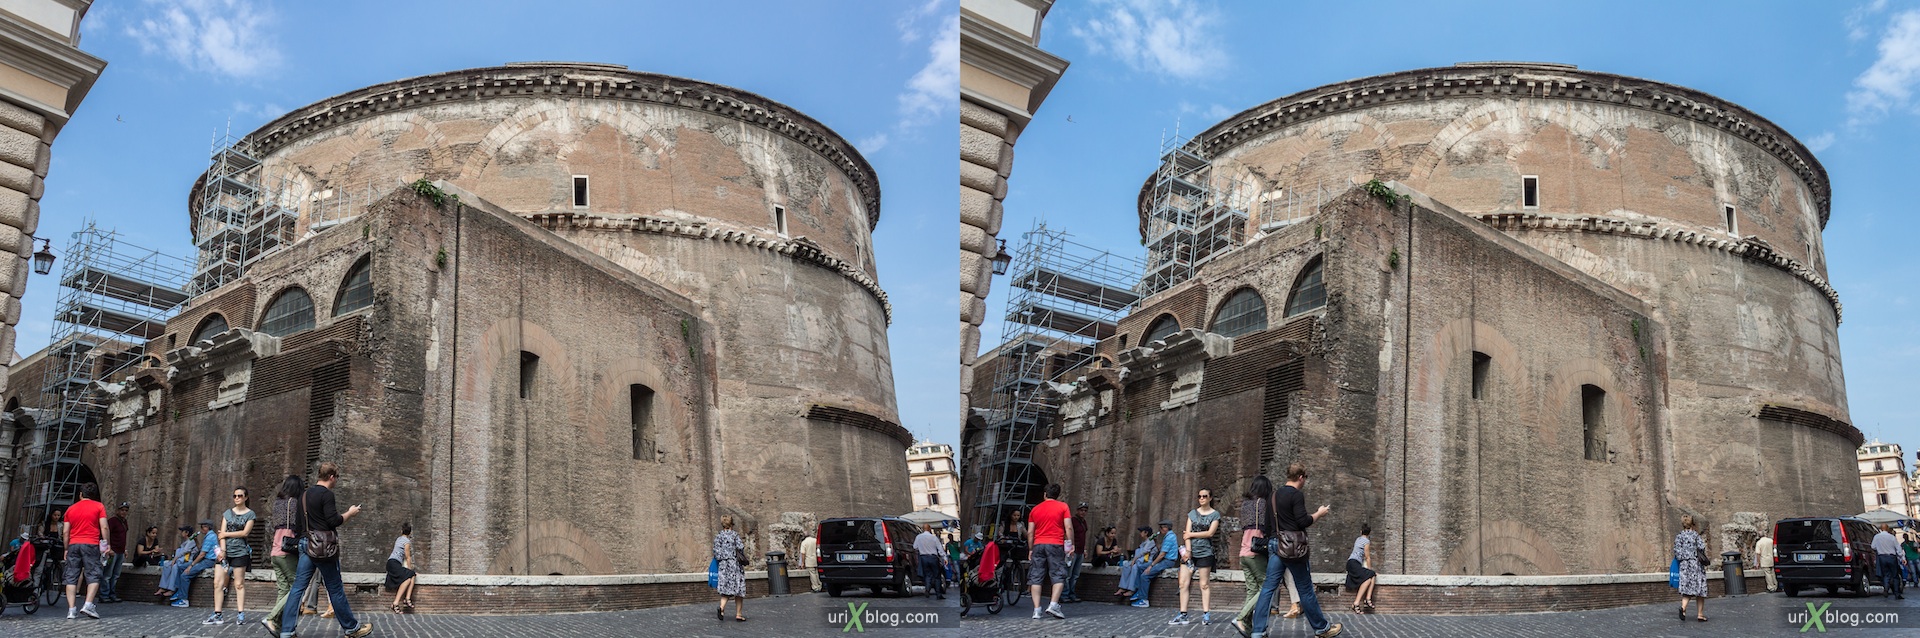 2012, Pantheon, Piazza della Minerva square, Rome, Italy, 3D, stereo pair, cross-eyed, crossview, cross view stereo pair